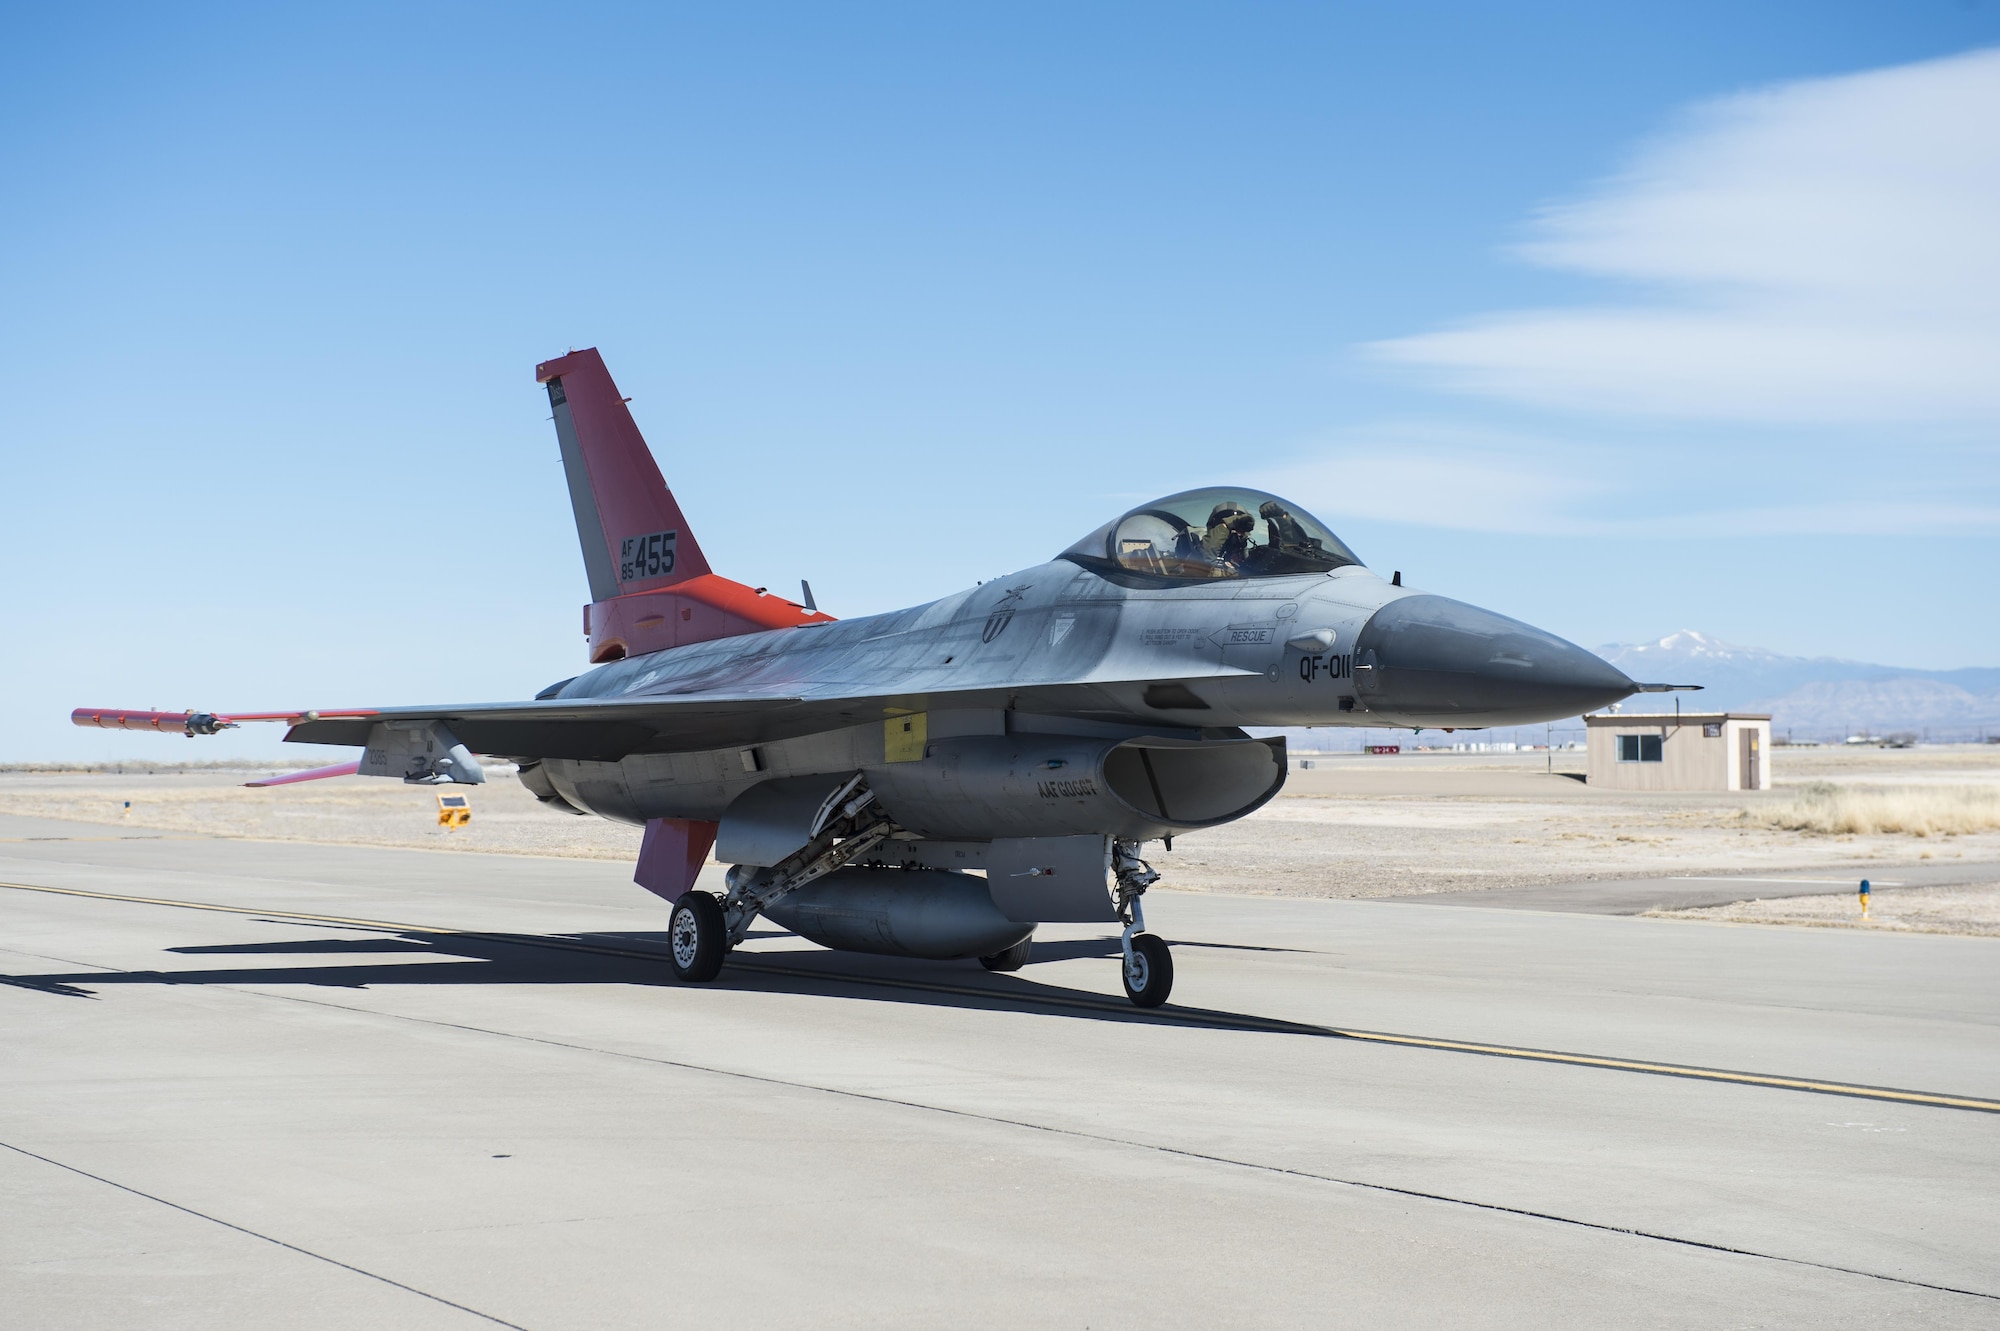 A QF-16 drone taxis back to the 82nd Aerial Targets Squadron, Det. 1 ramp, after its first flight at Holloman Air Force Base, N.M., Feb. 10, 2017. The QF-16 has been flying at Tyndall Air Force Base, Florida since late 2012. This was the first flight at Holloman since the QF-4 Phantom officially retired in 2016 and the detachment transitioned to flying QF-16s. (U.S. Air Force photo by Senior Airman Emily Kenney)